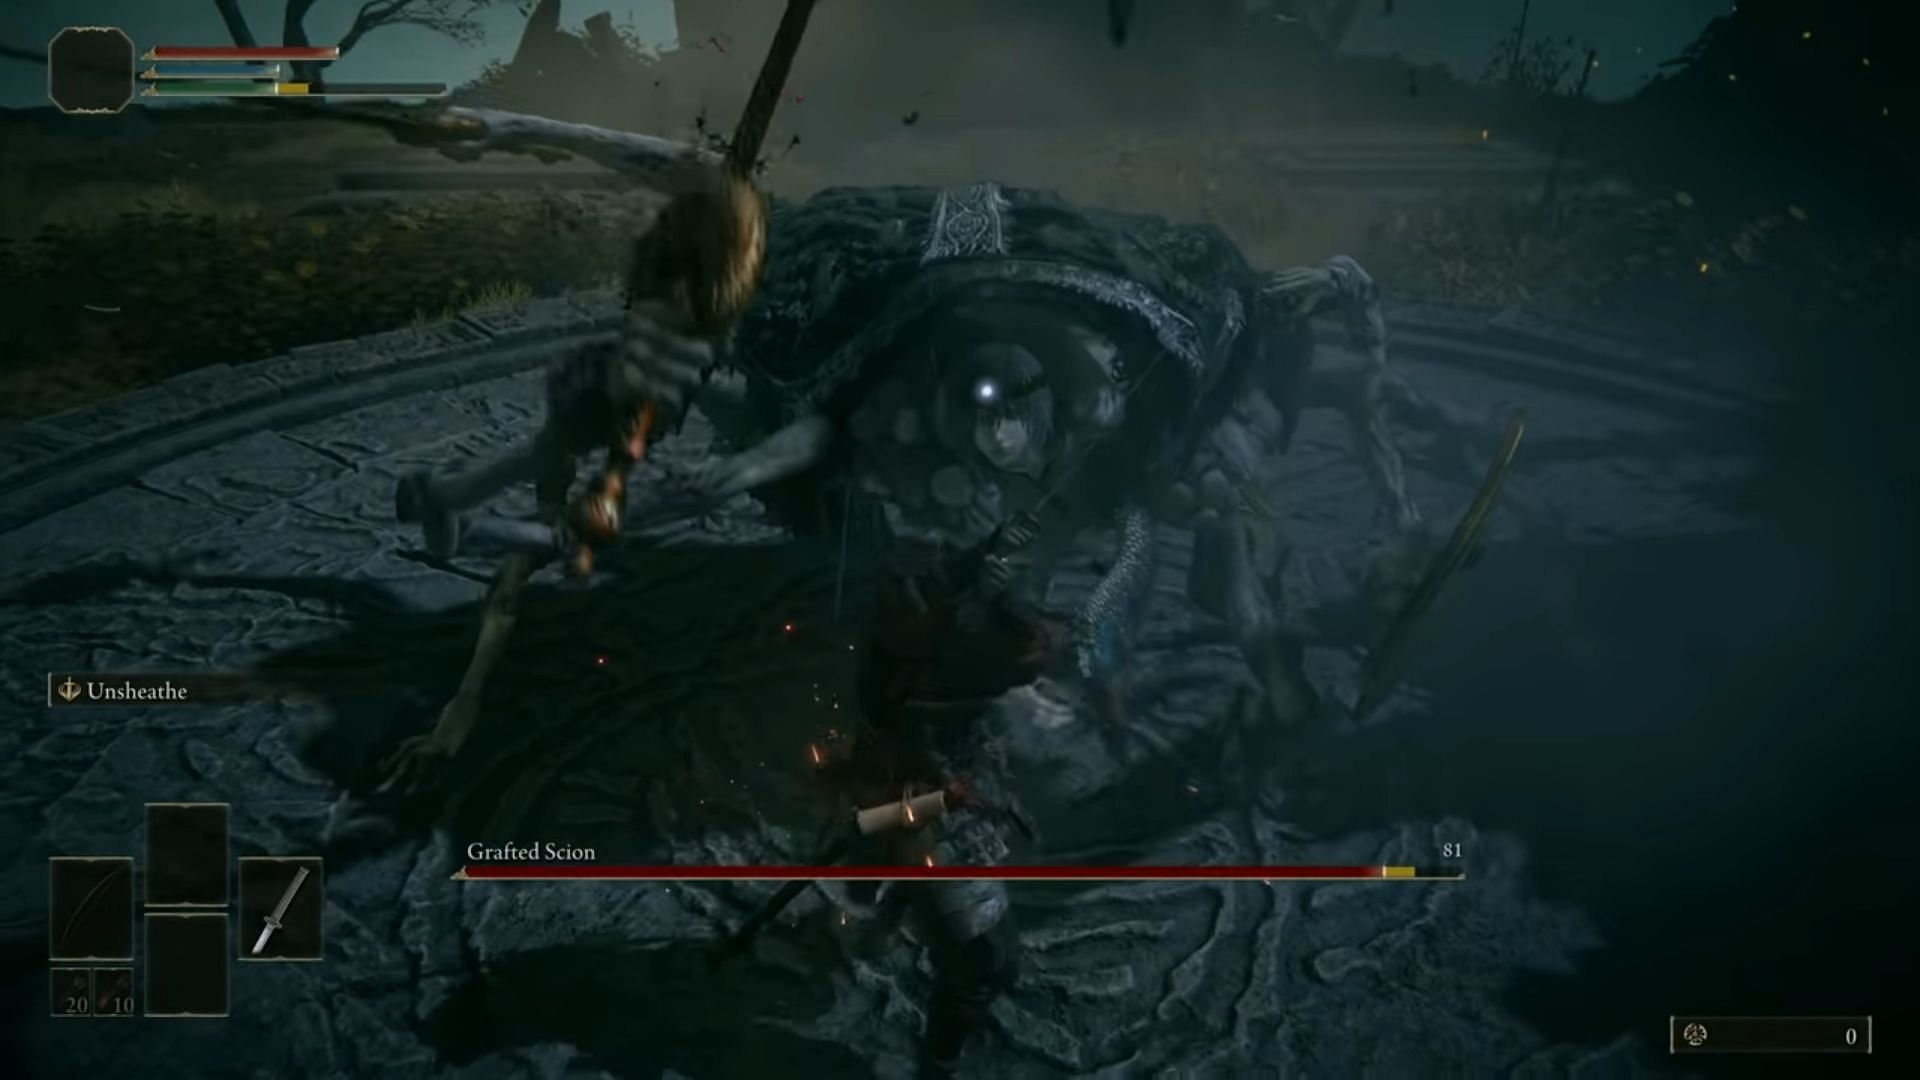 Grafted Scion&#039;s thrusting and spinning attacks in Elden Ring can melt players in no time (Image via Esoterickk/Youtube)